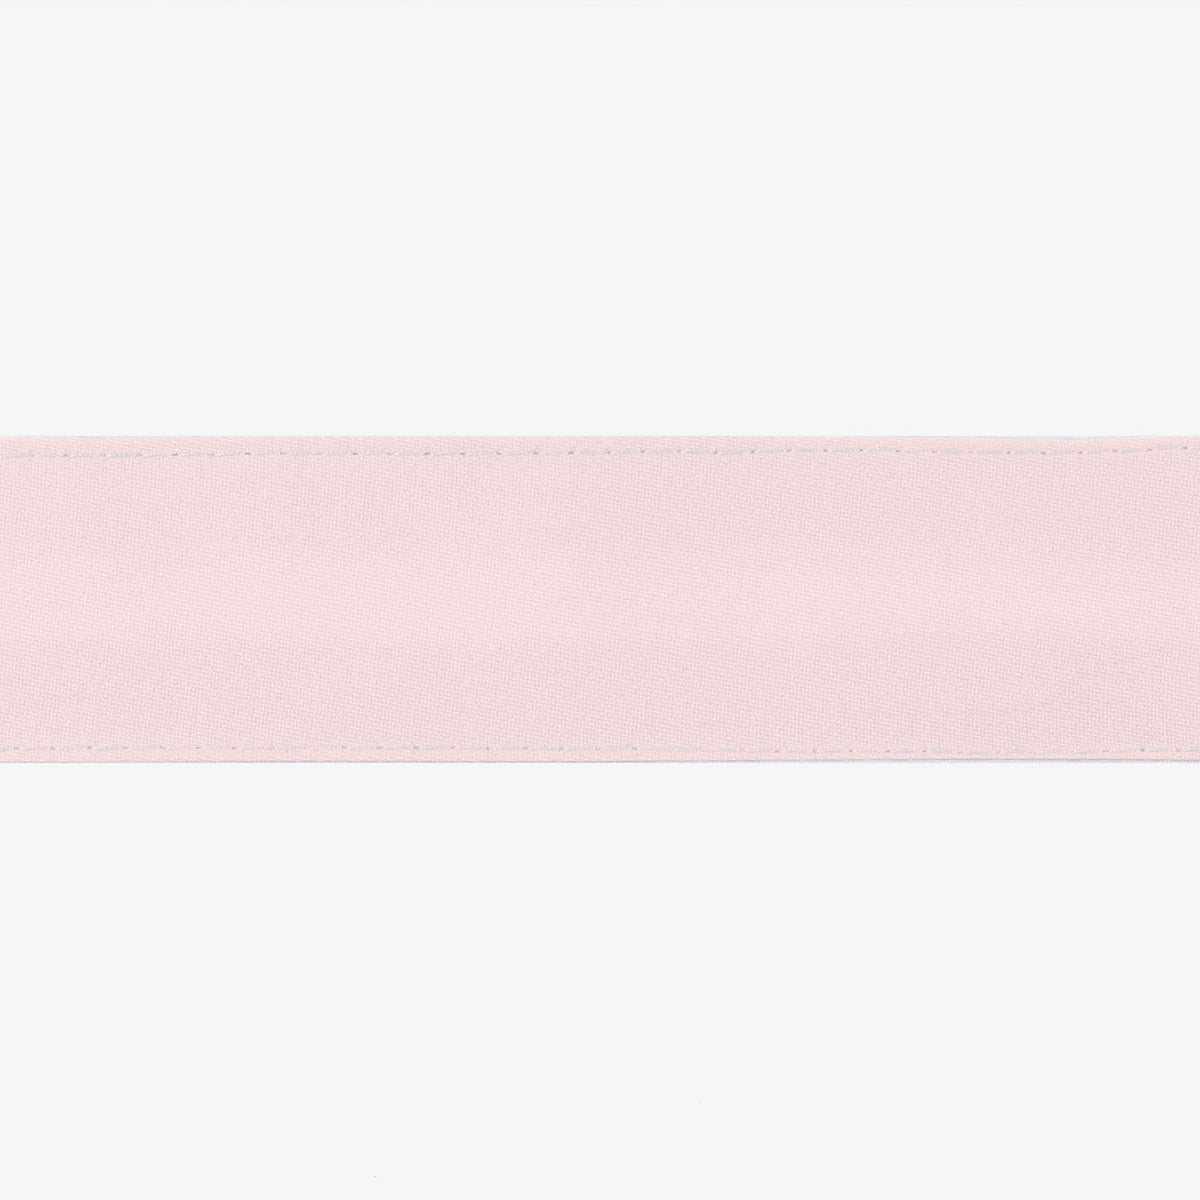 Swatch Sample of Matouk Lowell Tissue Box Cover in Color Pink